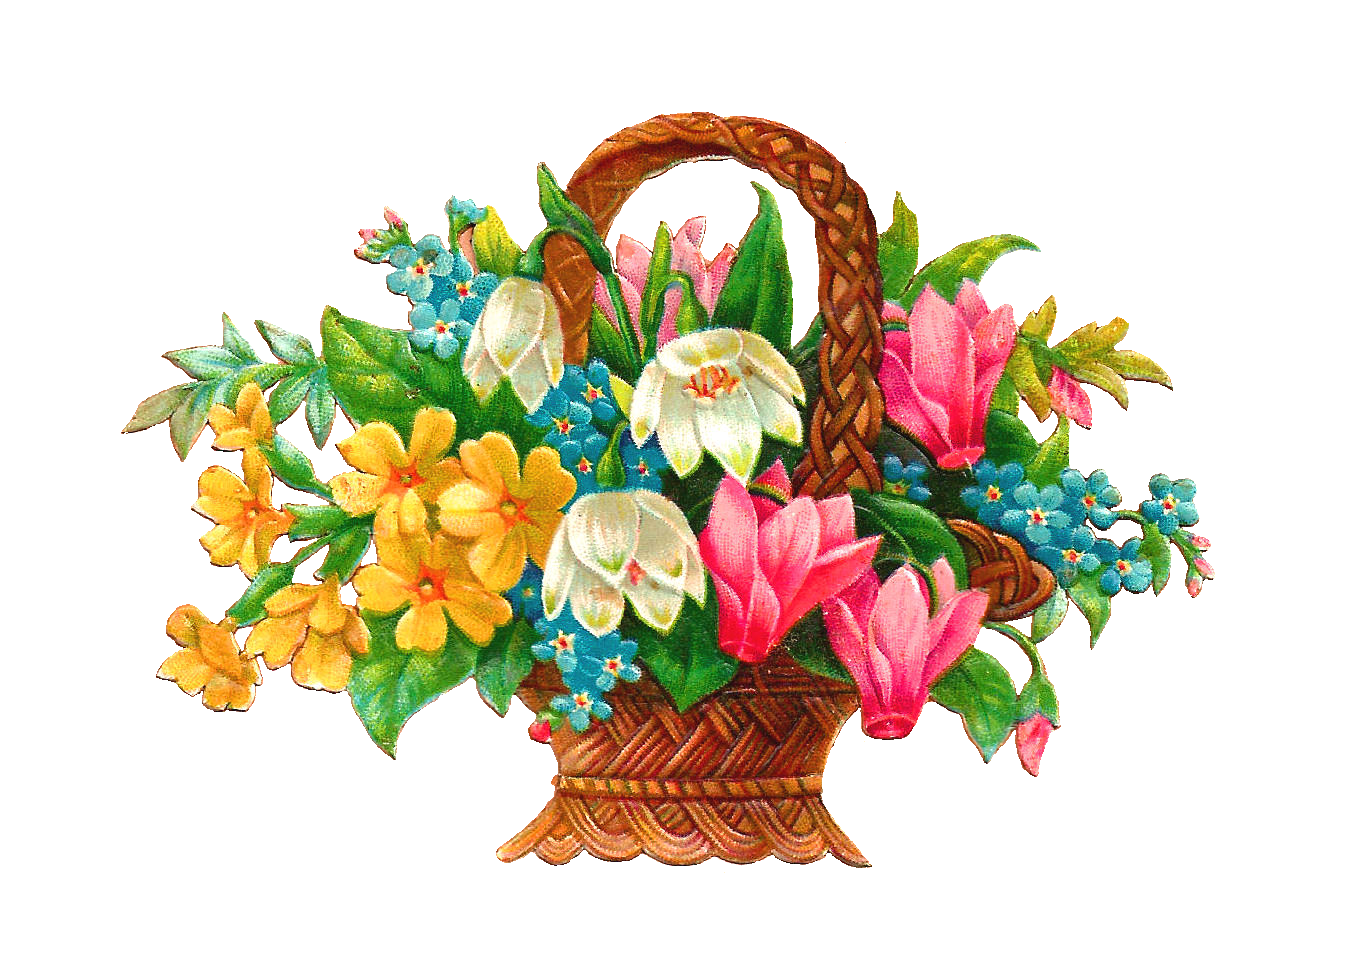 Basket Of Flowers Clipart